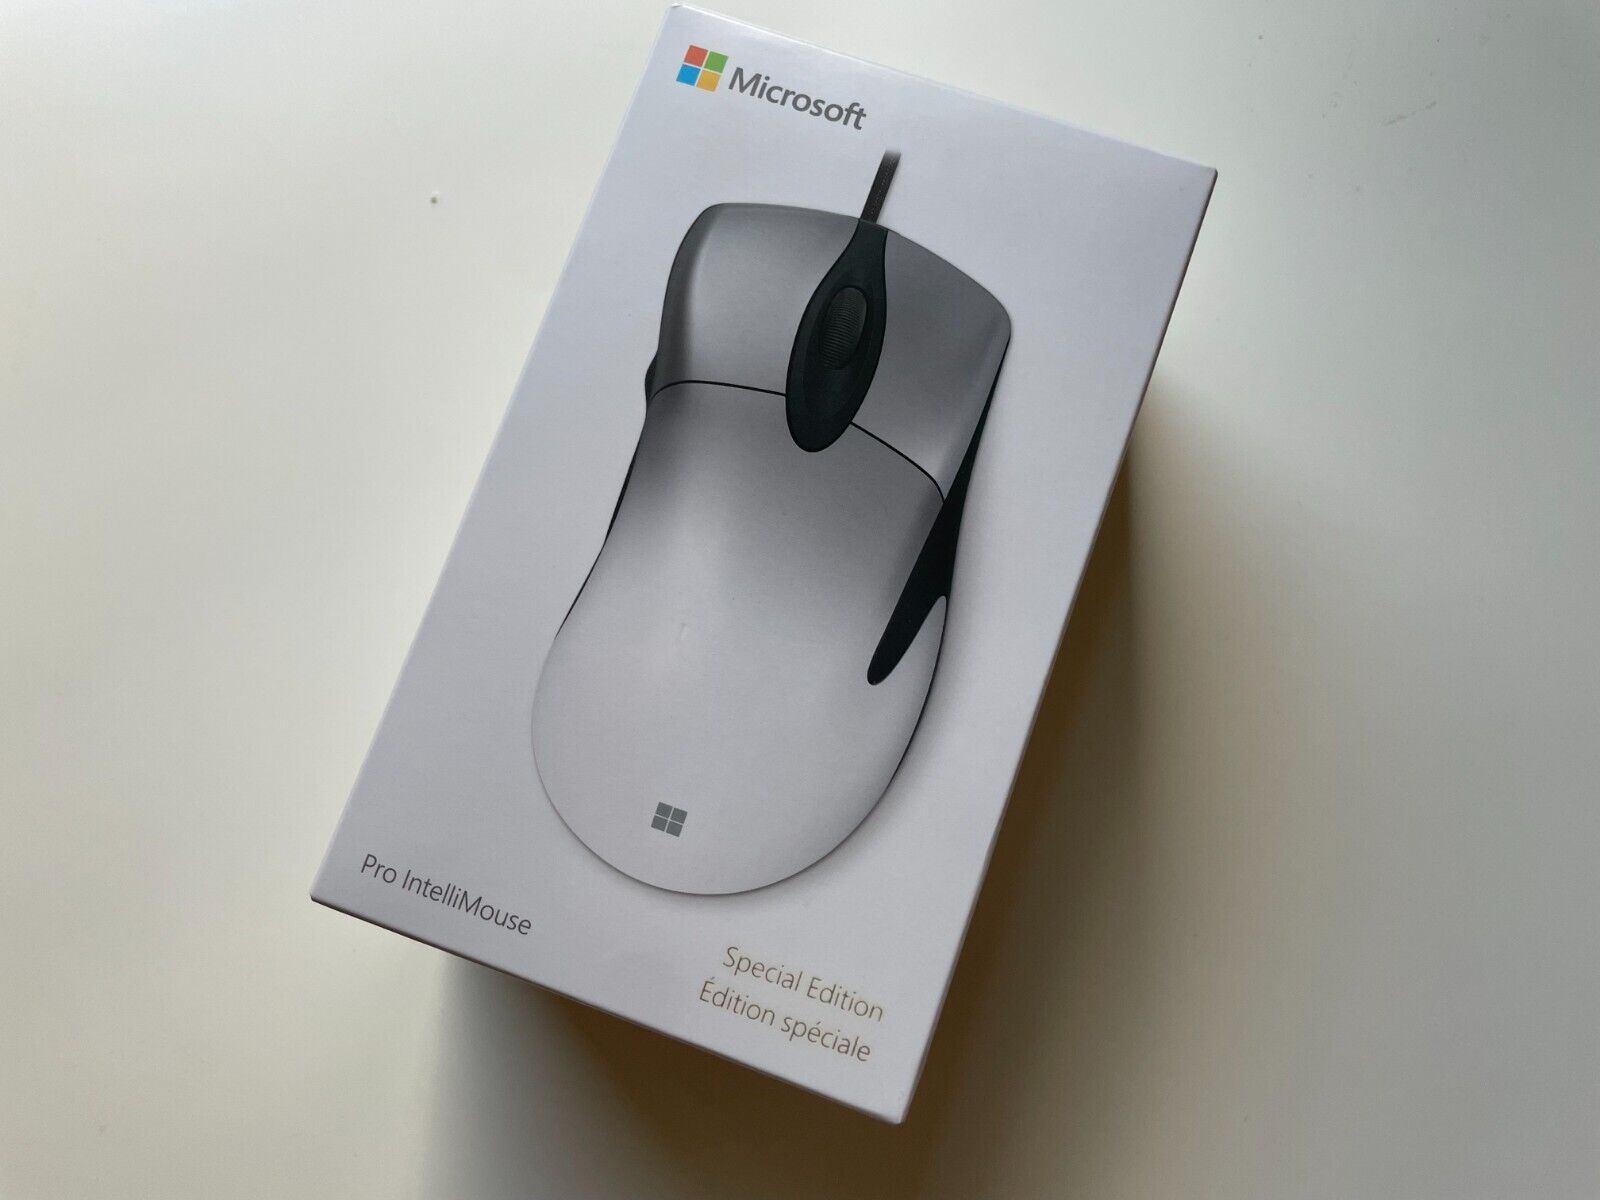 Box only - Microsoft ProintelliMouse special edition